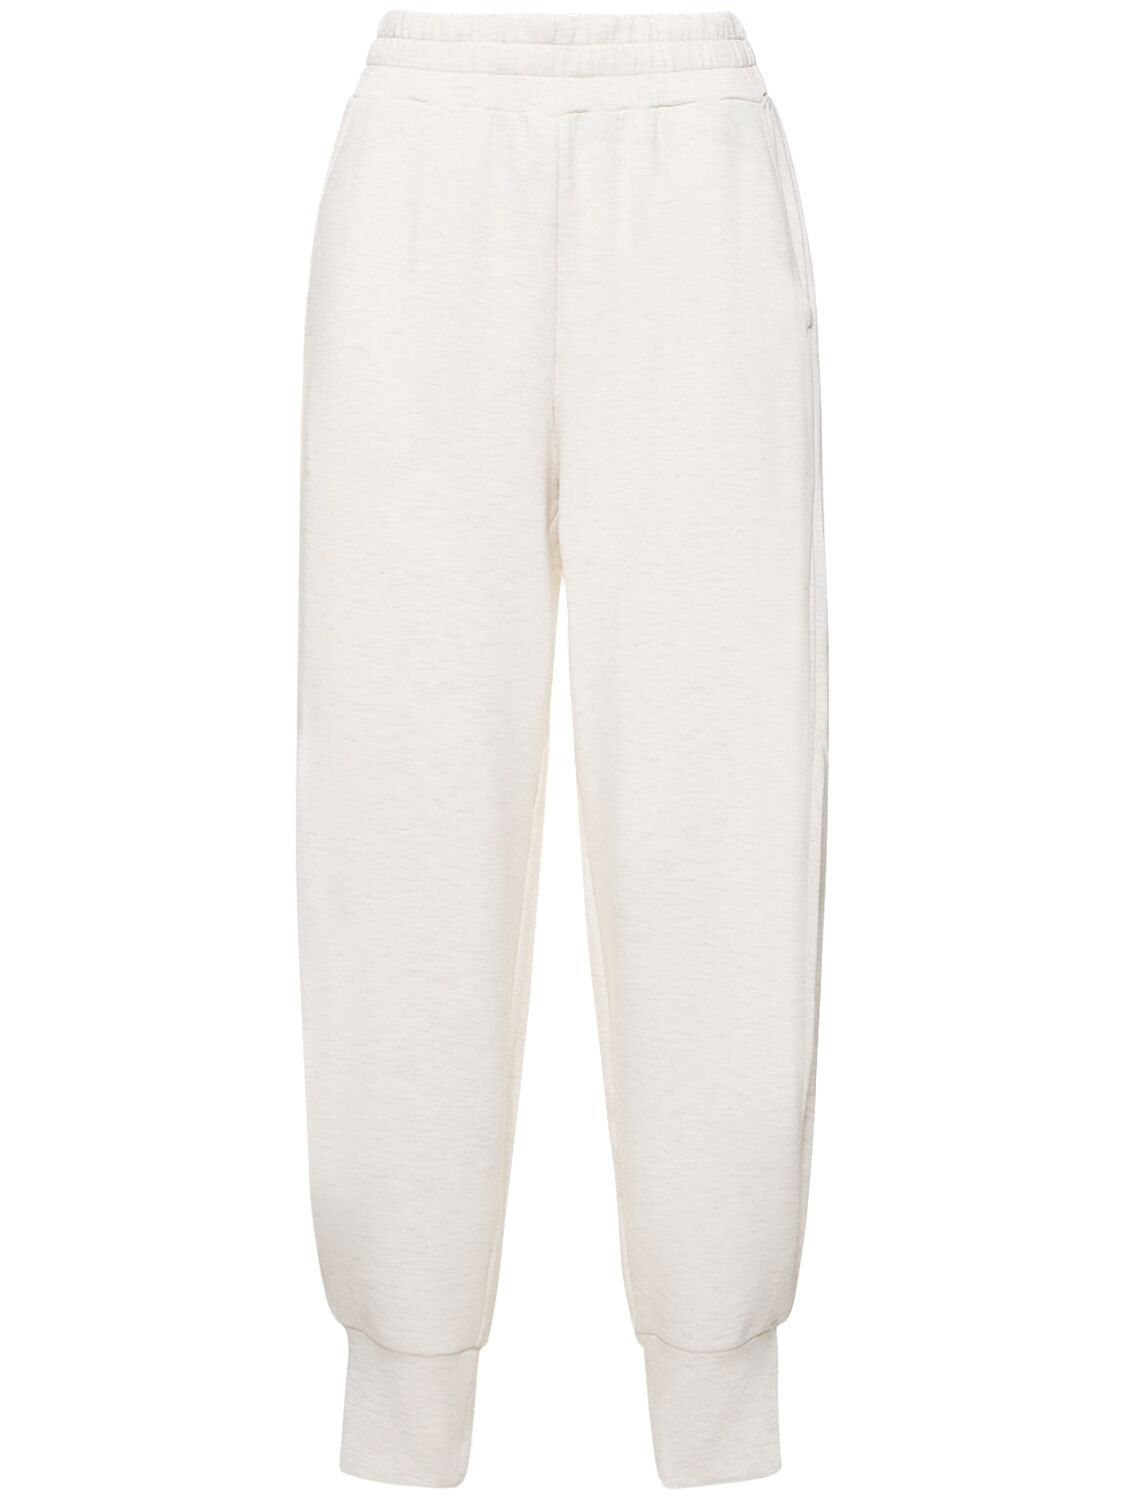 Image of The Relaxed High Waist Sweatpants